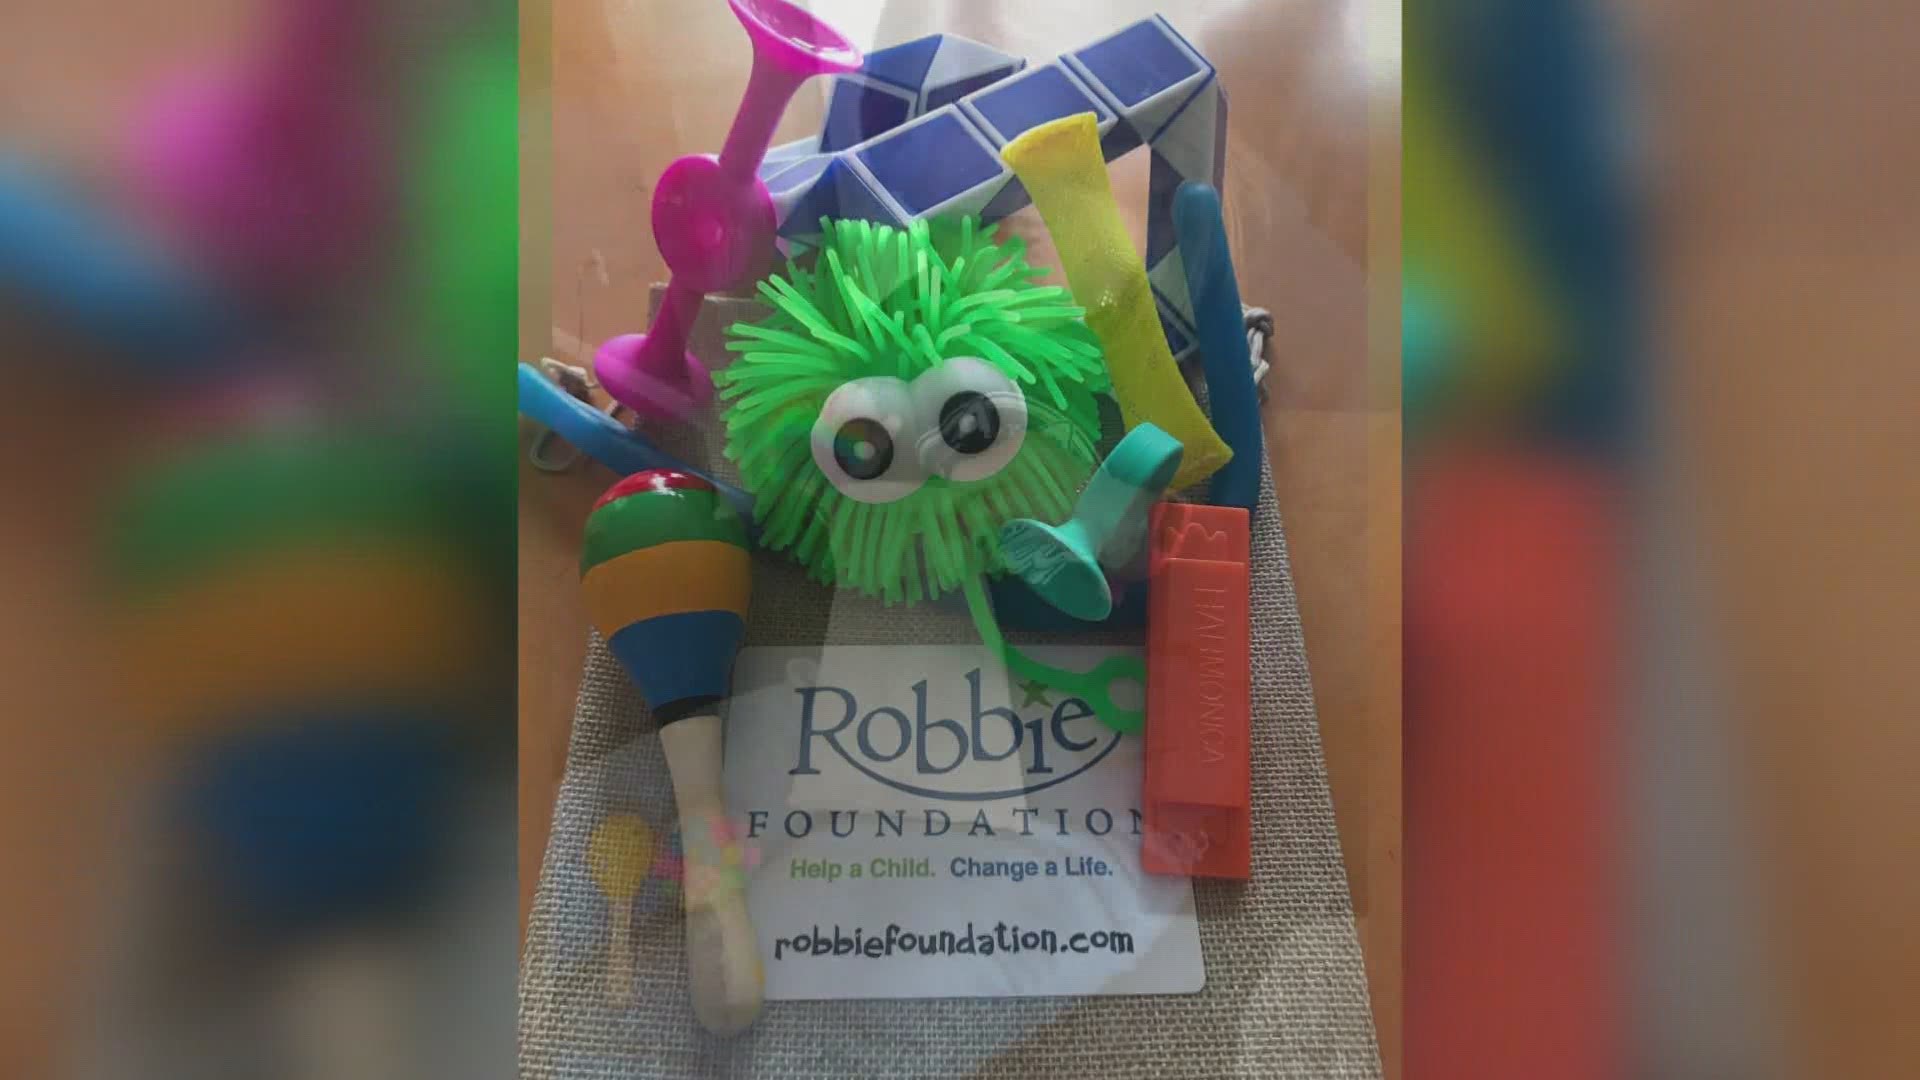 Robbie Foundation gives children with special needs something to smile about during this trying time.